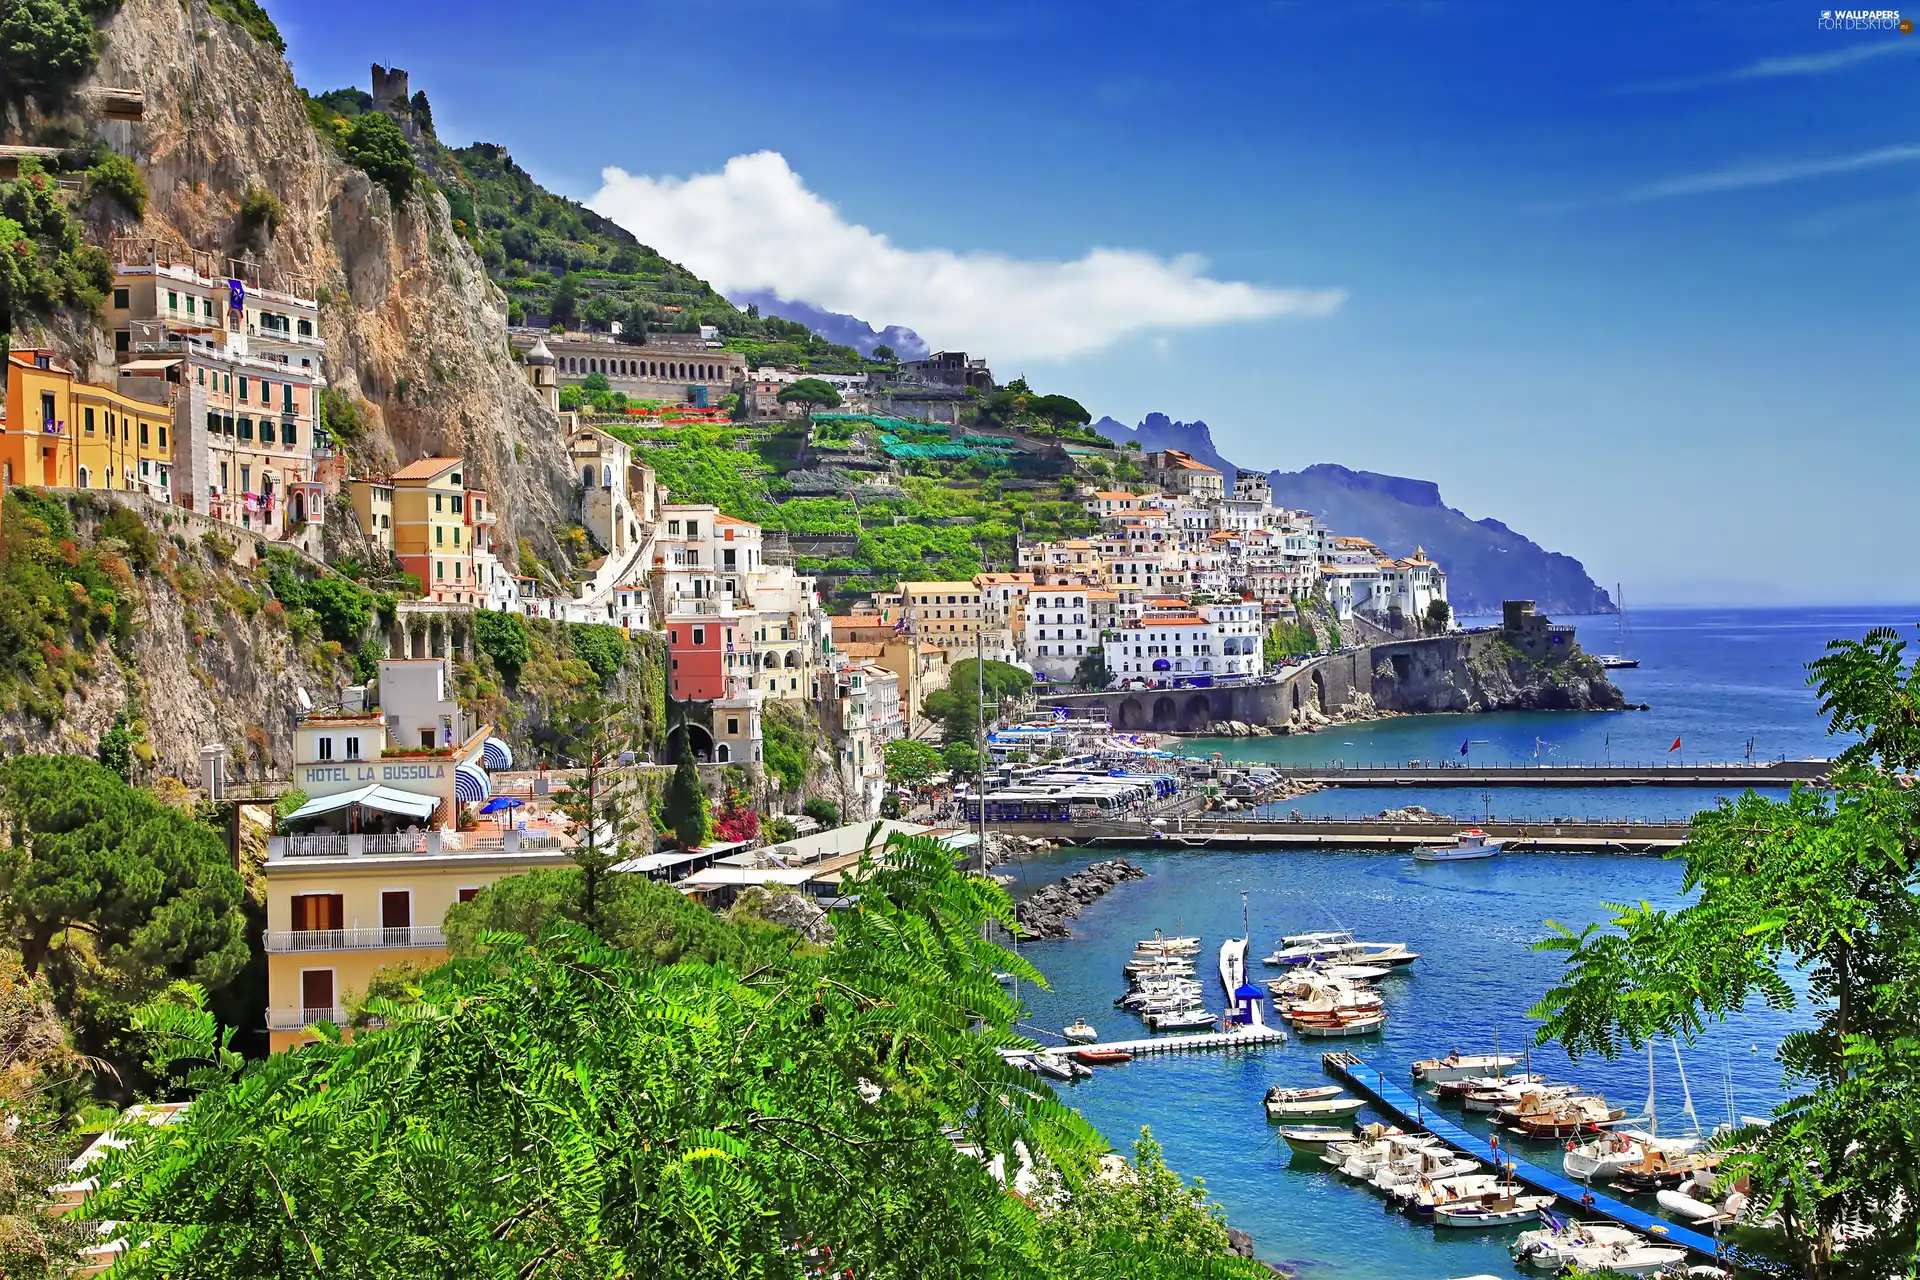 sea, Hotels, Coast, Mountains, Picture of Town, Positano, Italy, Boats